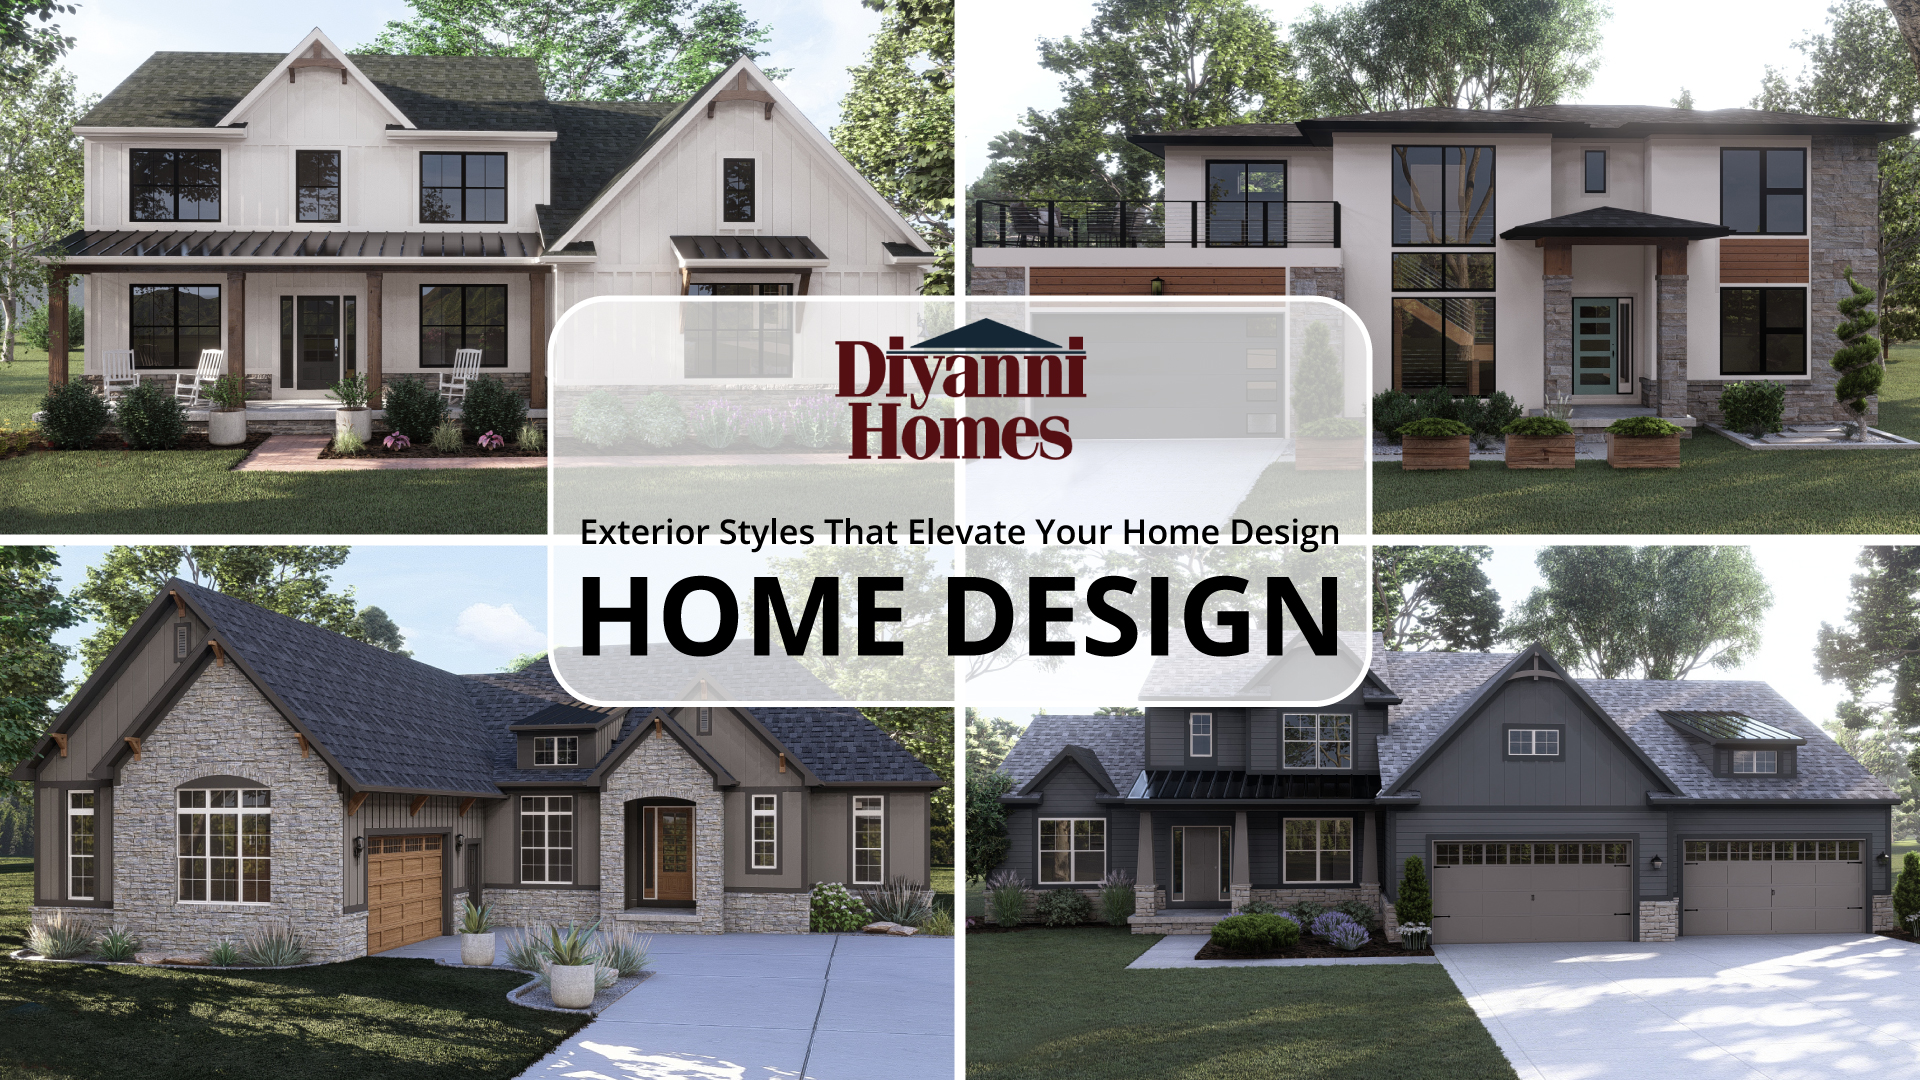 Exterior Styles That Elevate Your Home Design with Diyanni Homes